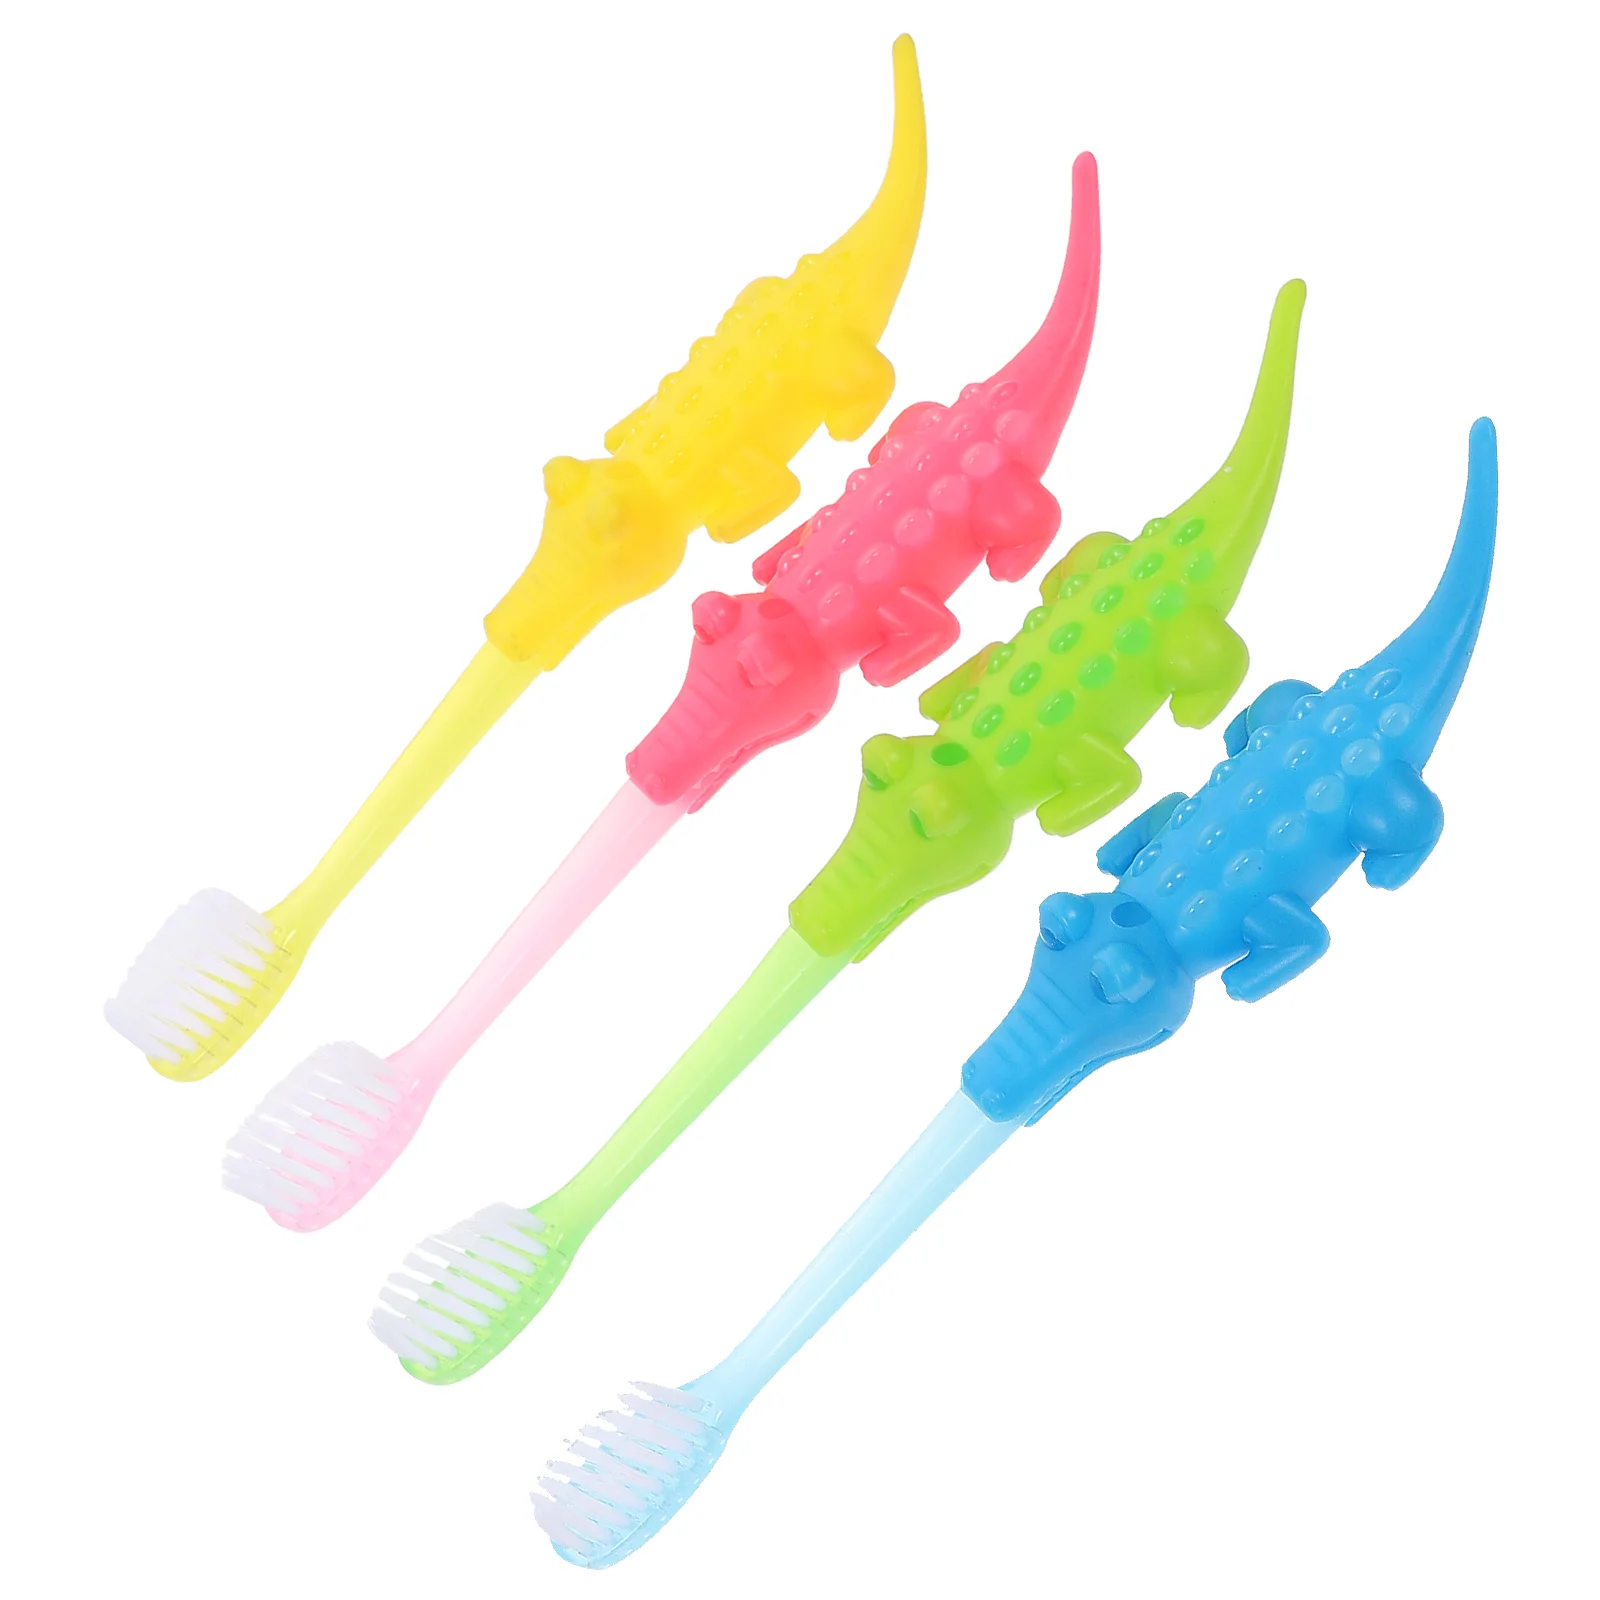 

8pcs Kids Oral Care Toothbrushes Cartoon Supple Toothbrushes (Assorted Color)